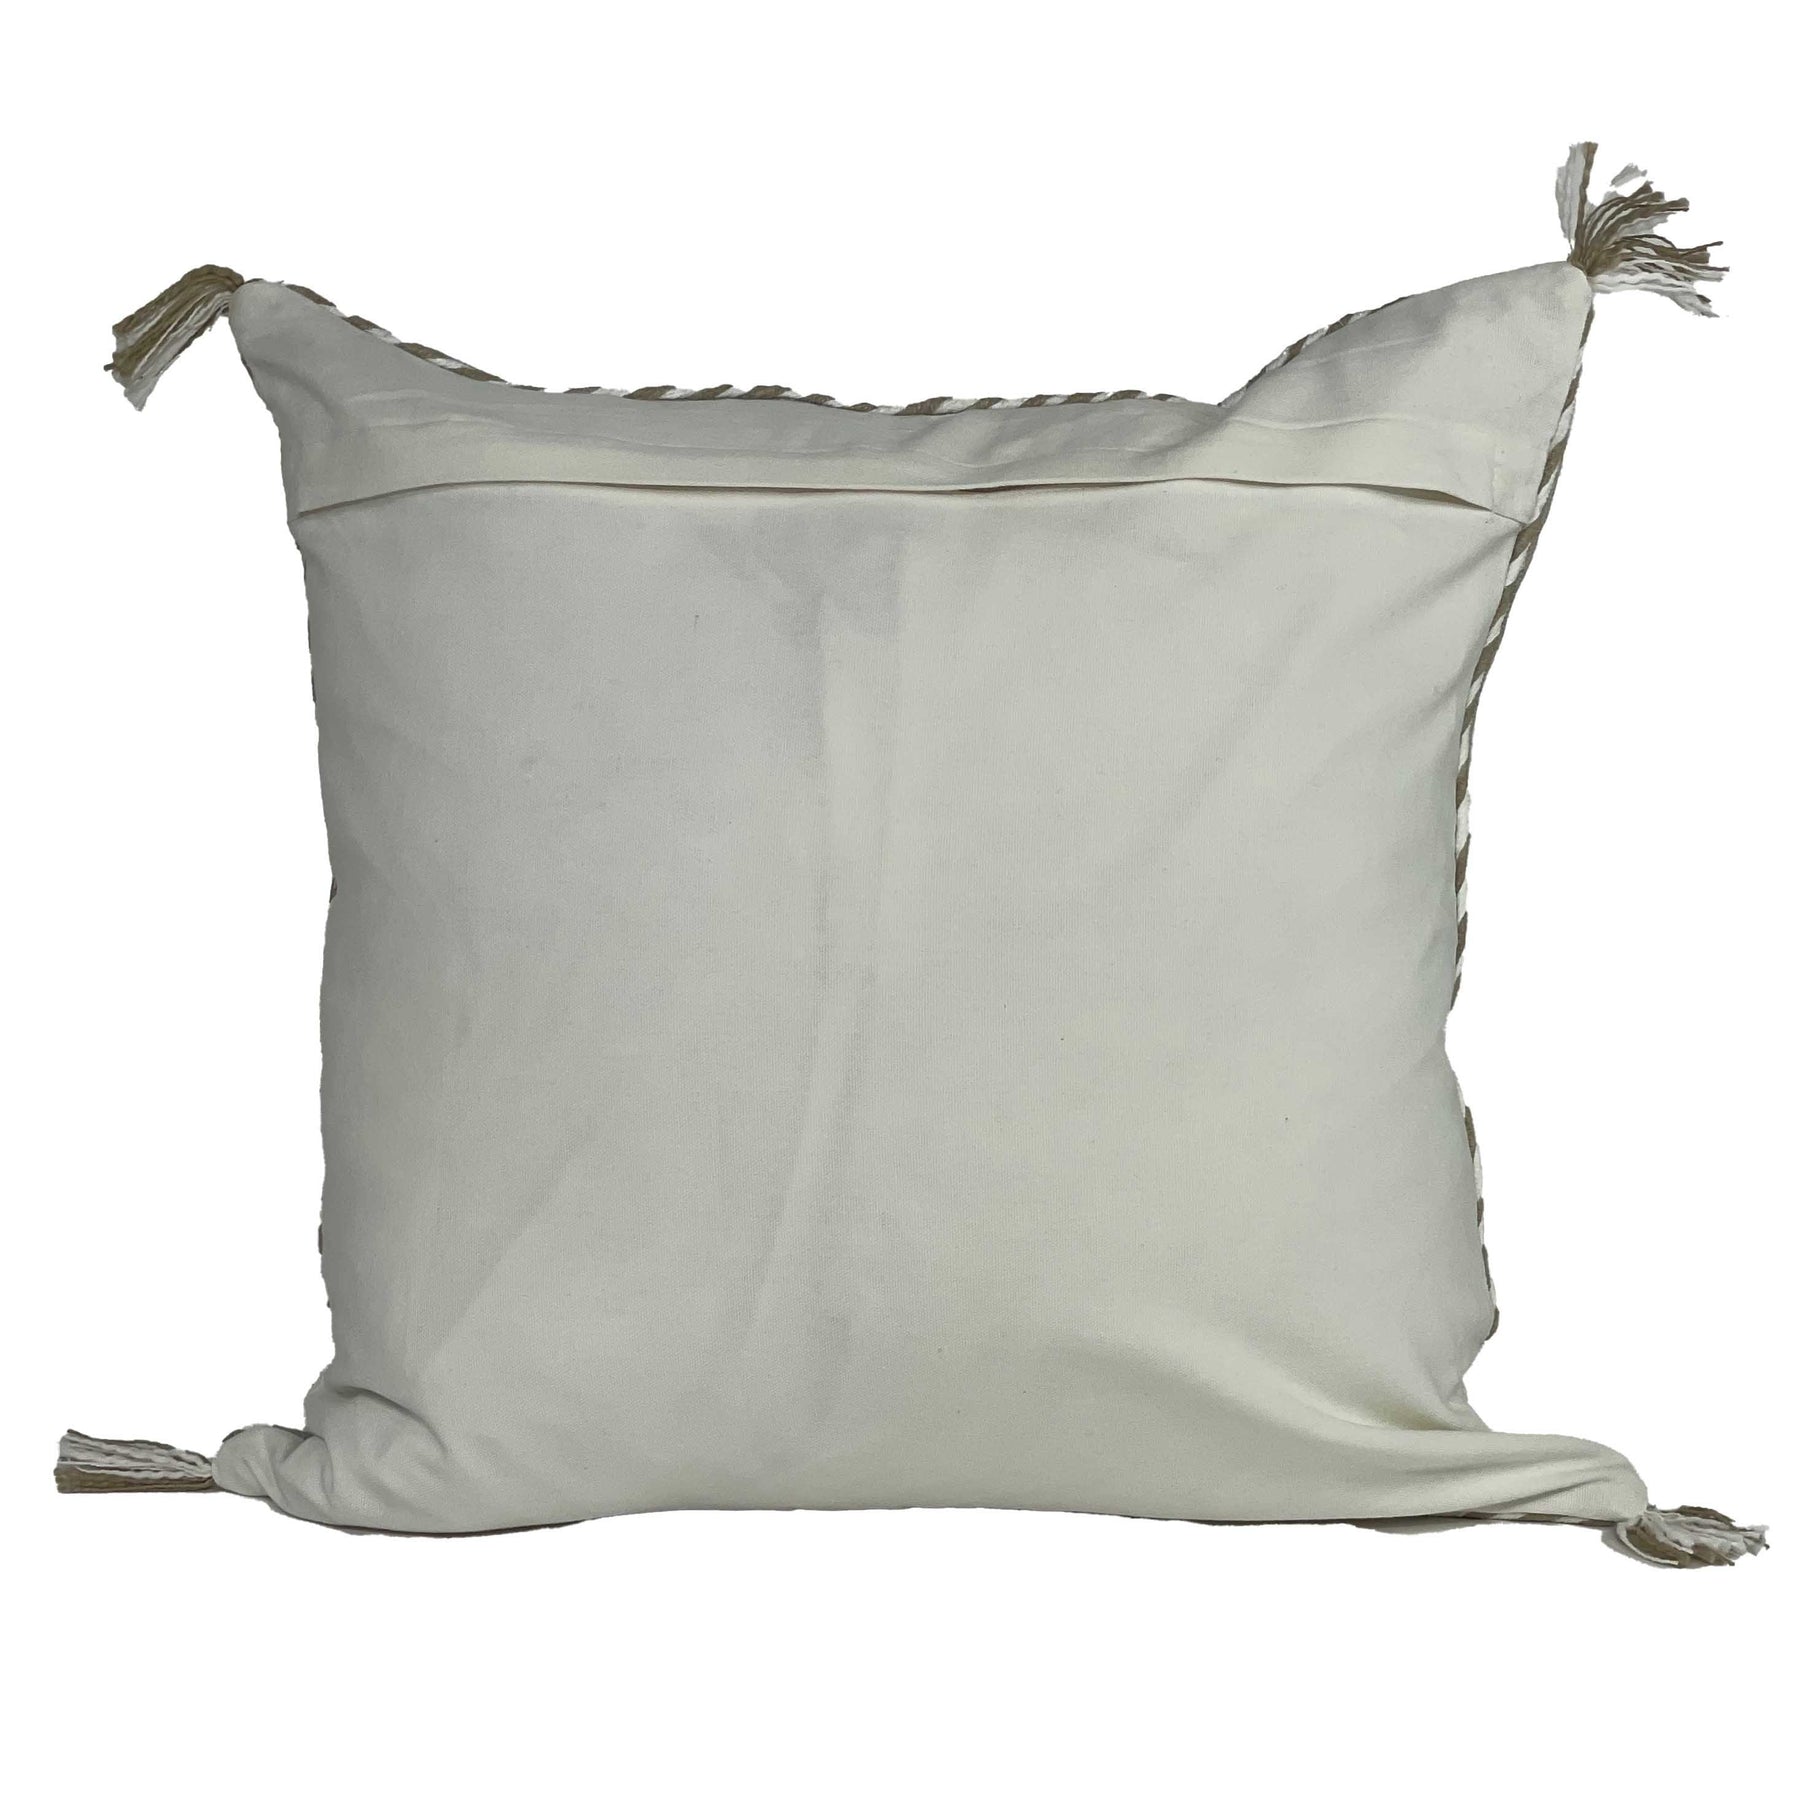 Throw Pillows For Grey Couch? We Got You! - Bryar Wolf